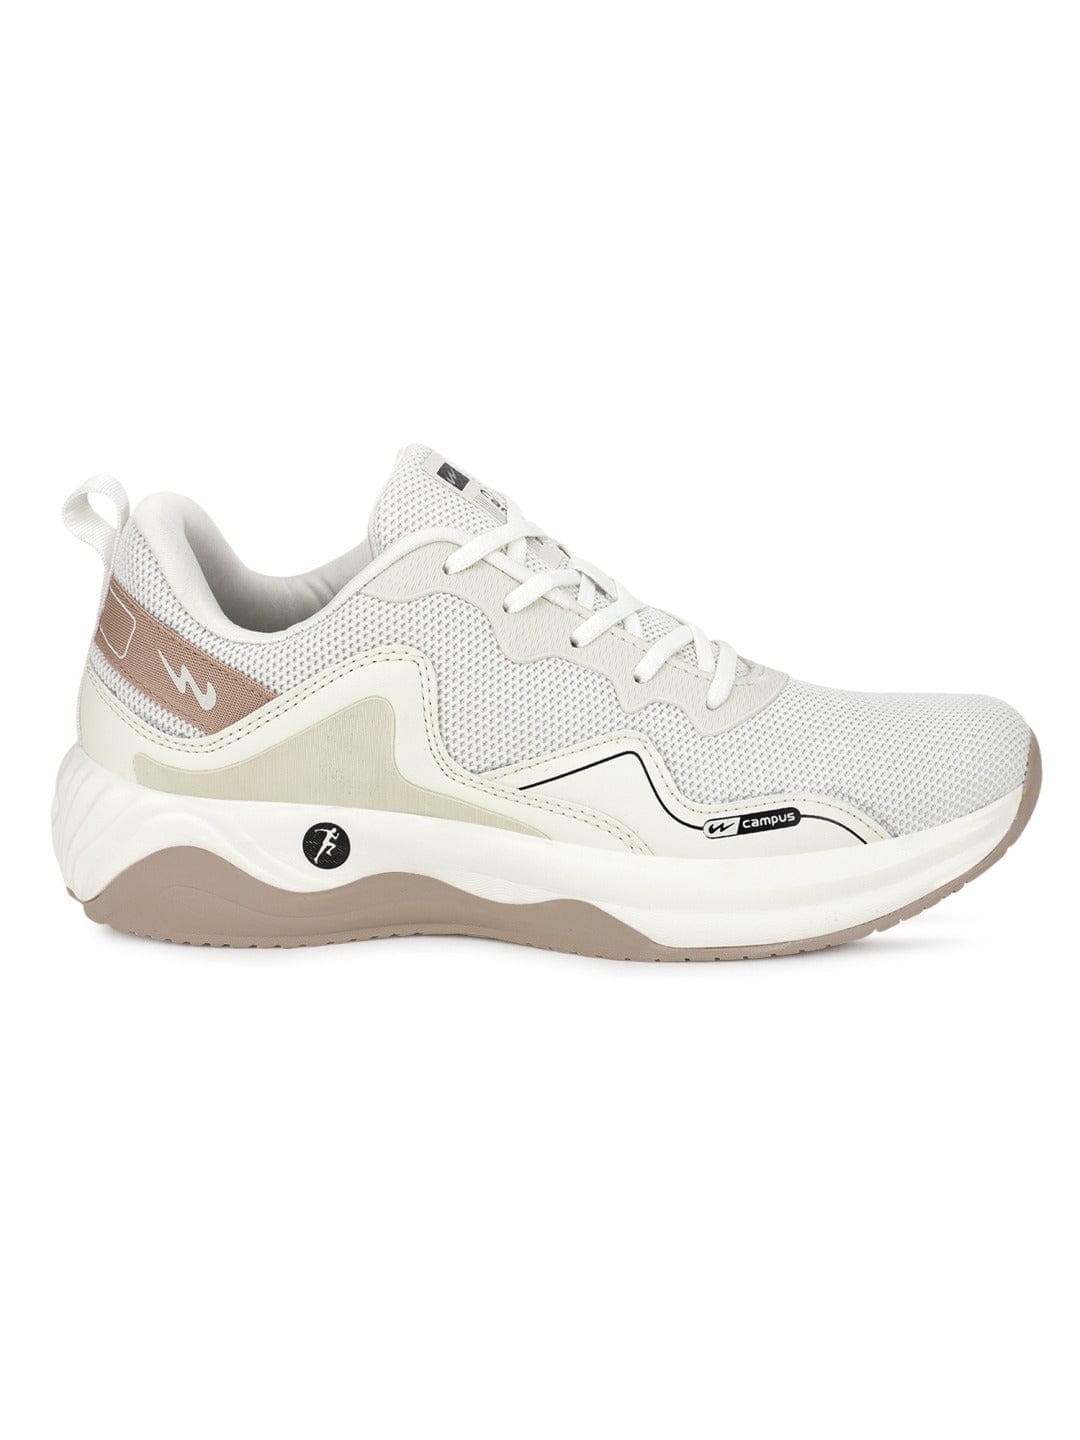 Buy HASHBRO Off White White Men's Running Shoes online | Campus Shoes